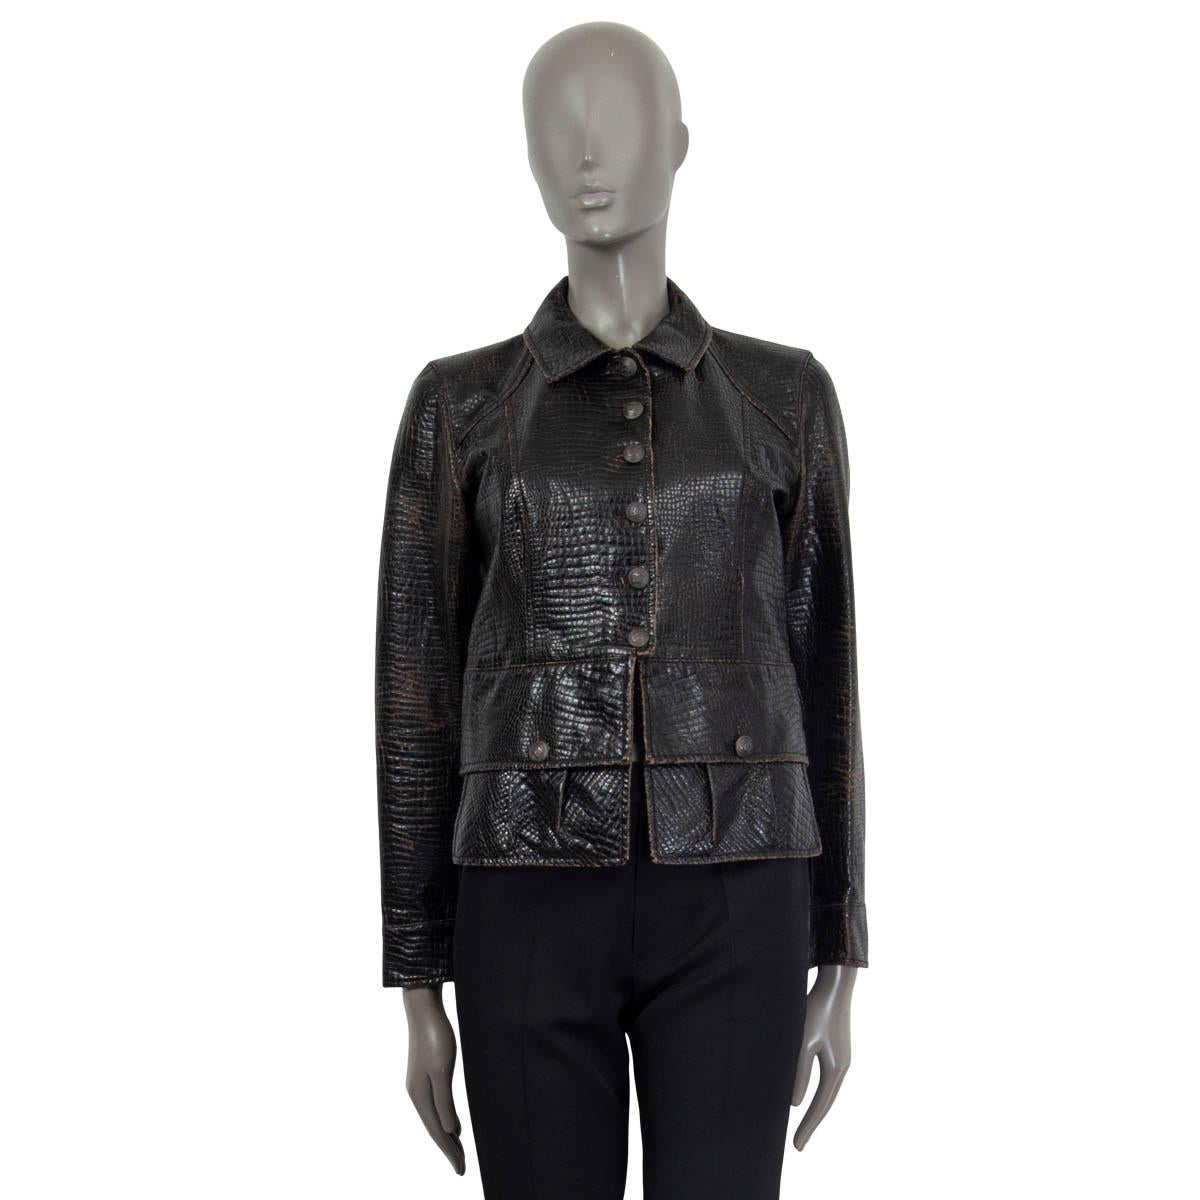 Black CHANEL dark brown 2003 CROC EMBOSSED FAUX LEATHER Jacket 38 S 03A